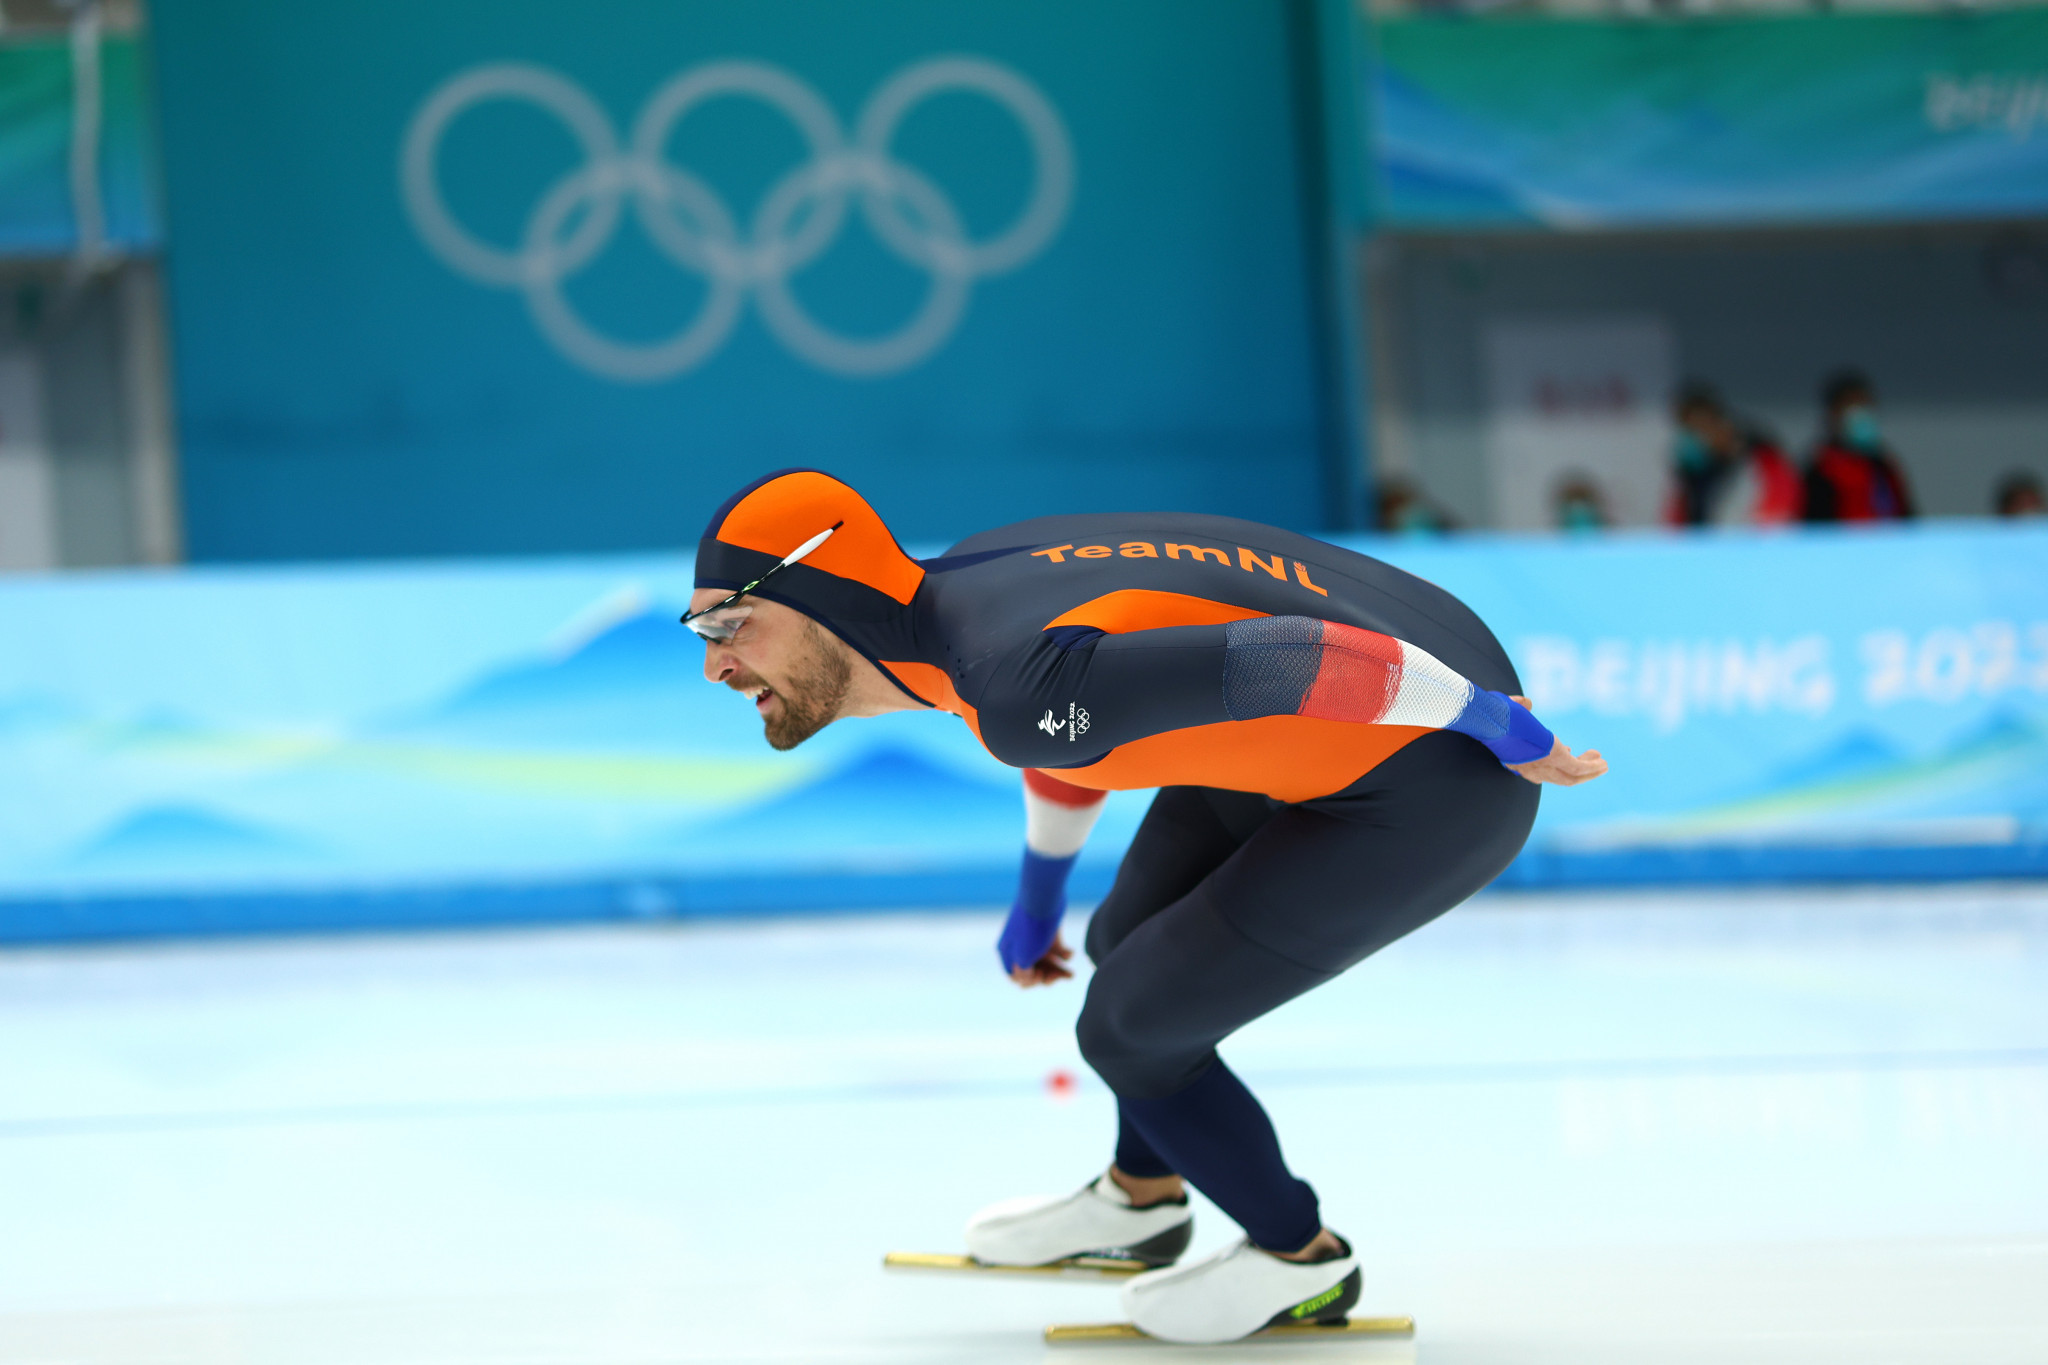 Kim was third in the men's 1,500m, won by Kjeld Nuis as the Dutch dominance of speed skating continued ©Getty Images